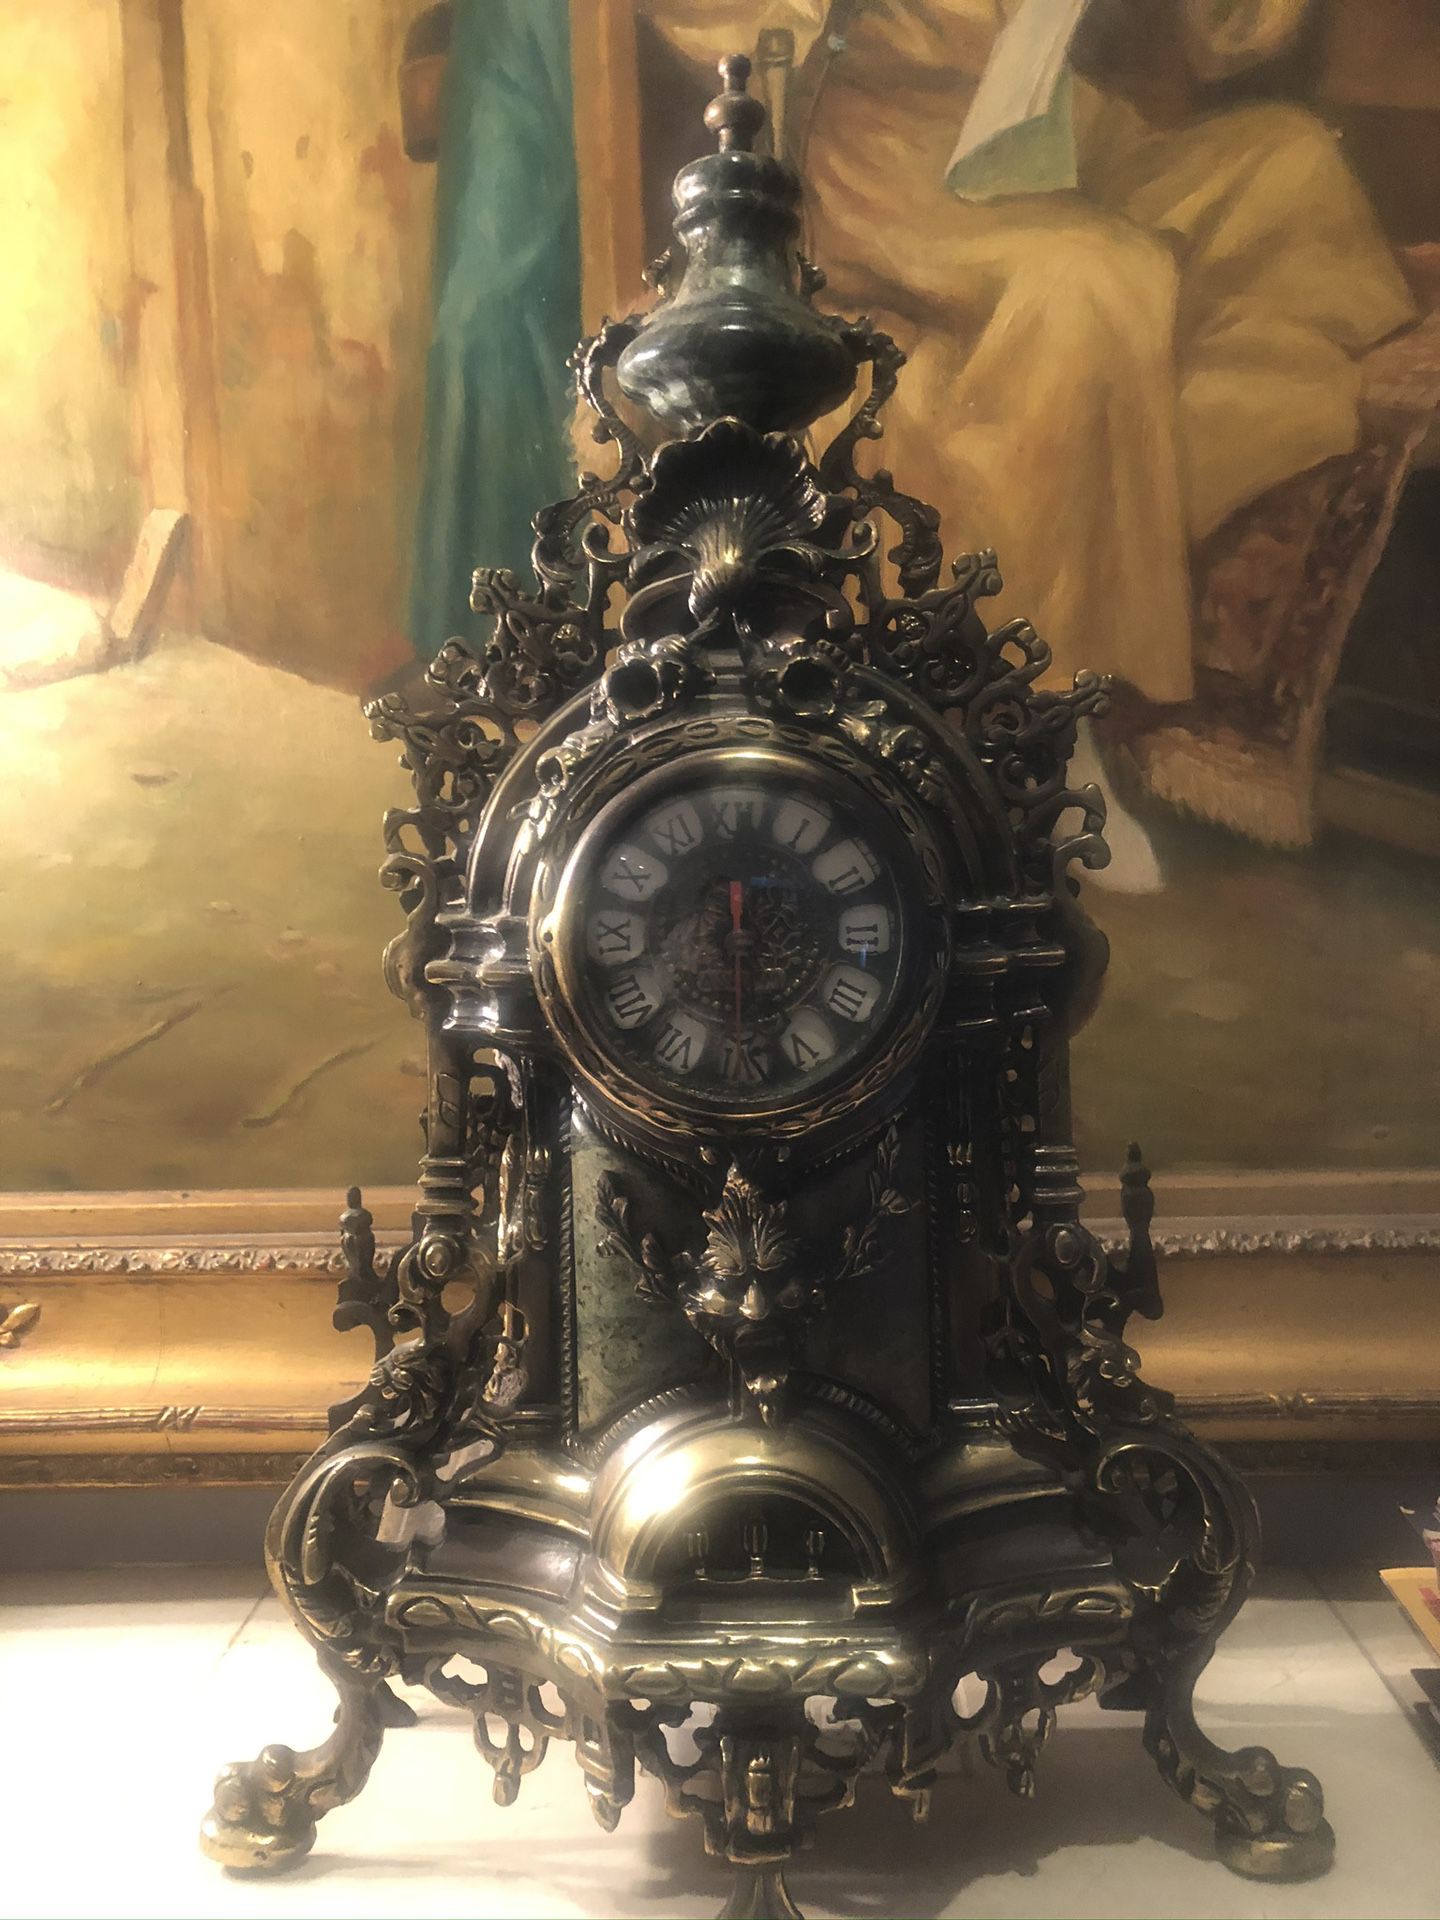 To candelabras with the clock marble